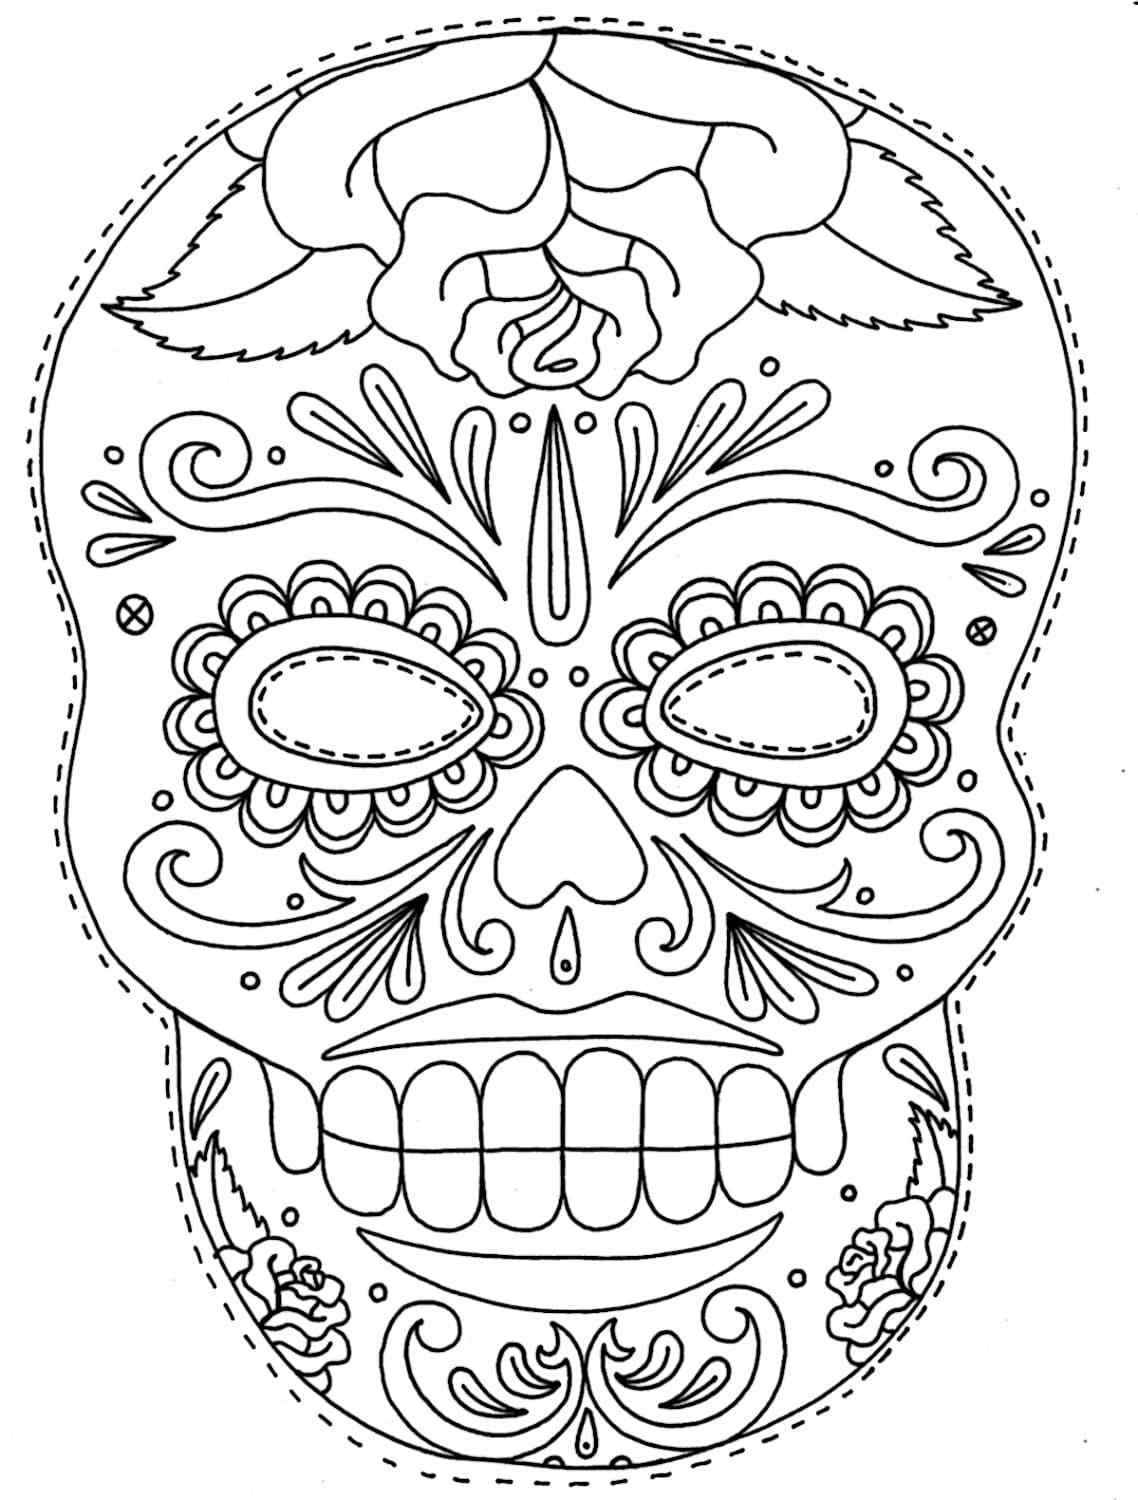 Painted Ornament On The Skull Coloring Page